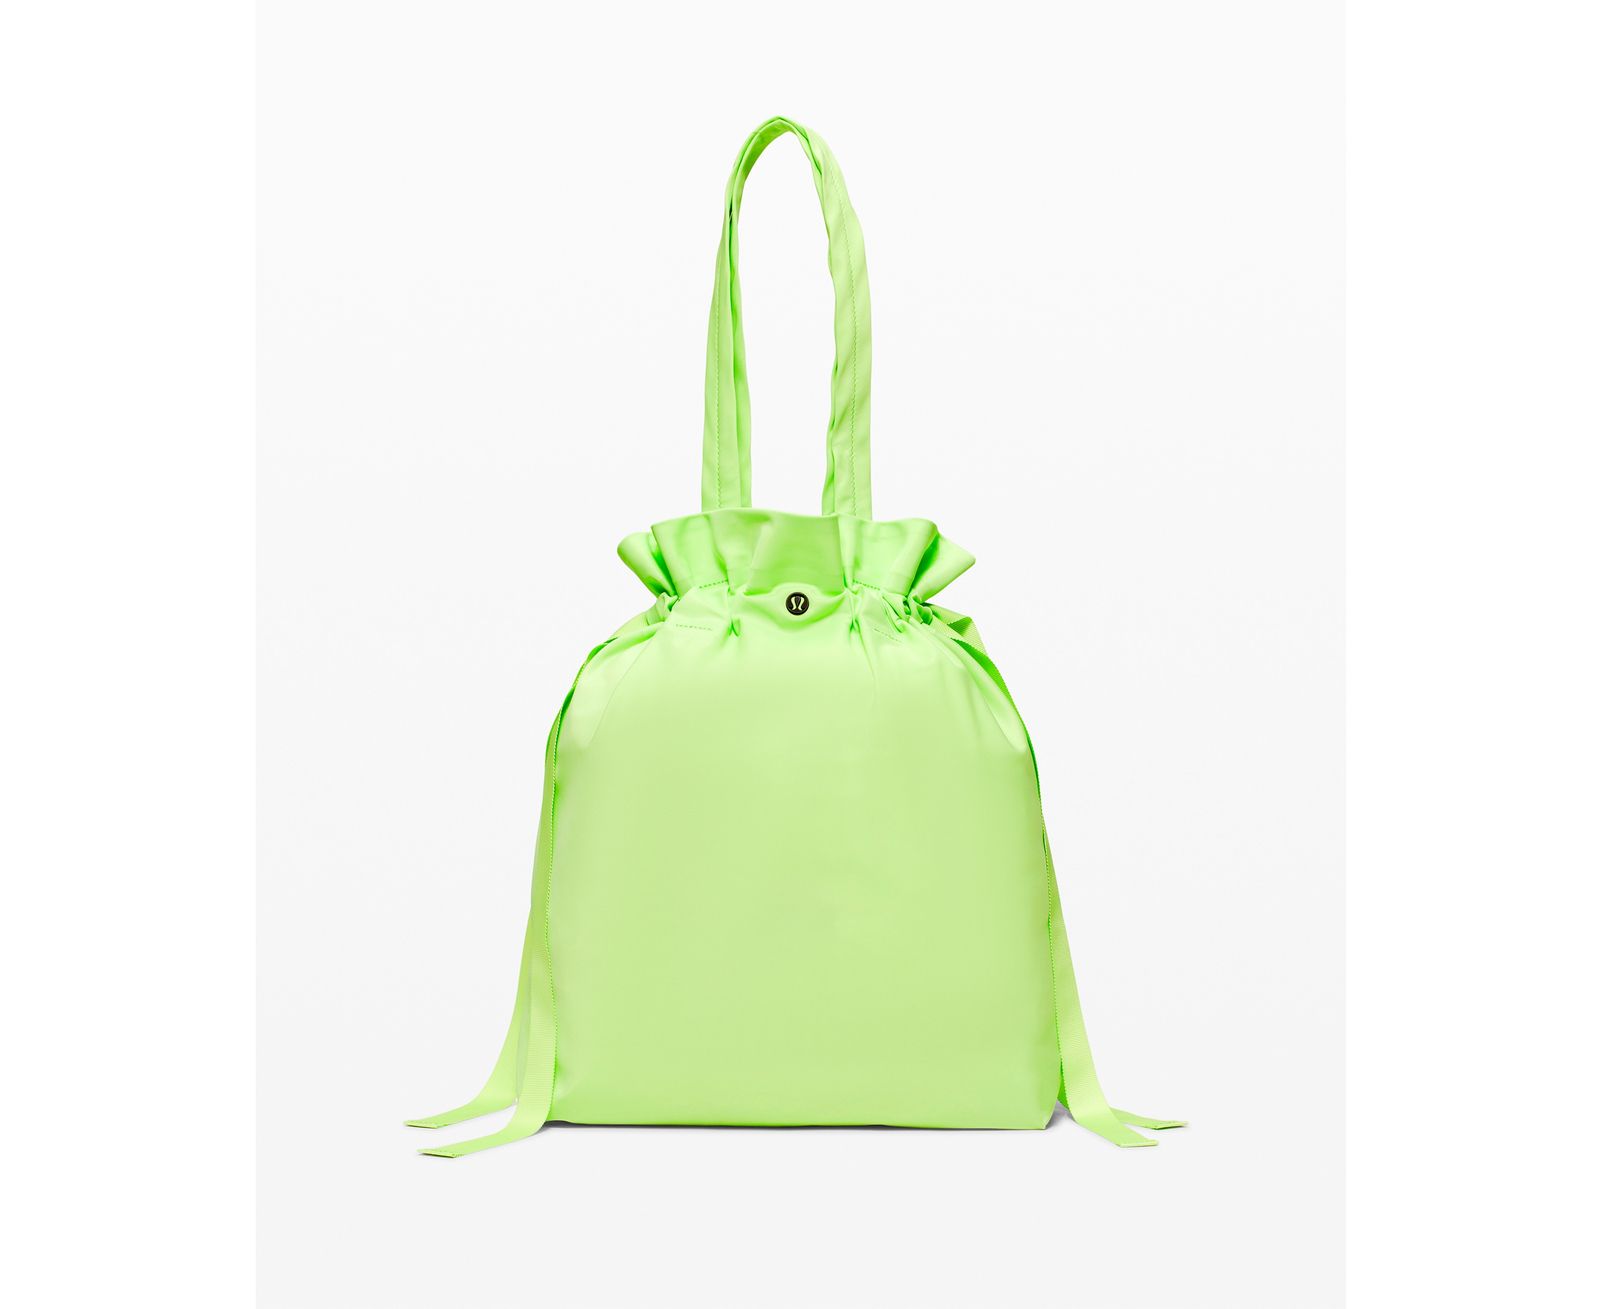 LuLu Reusable Juco Bag 1pc Online at Best Price